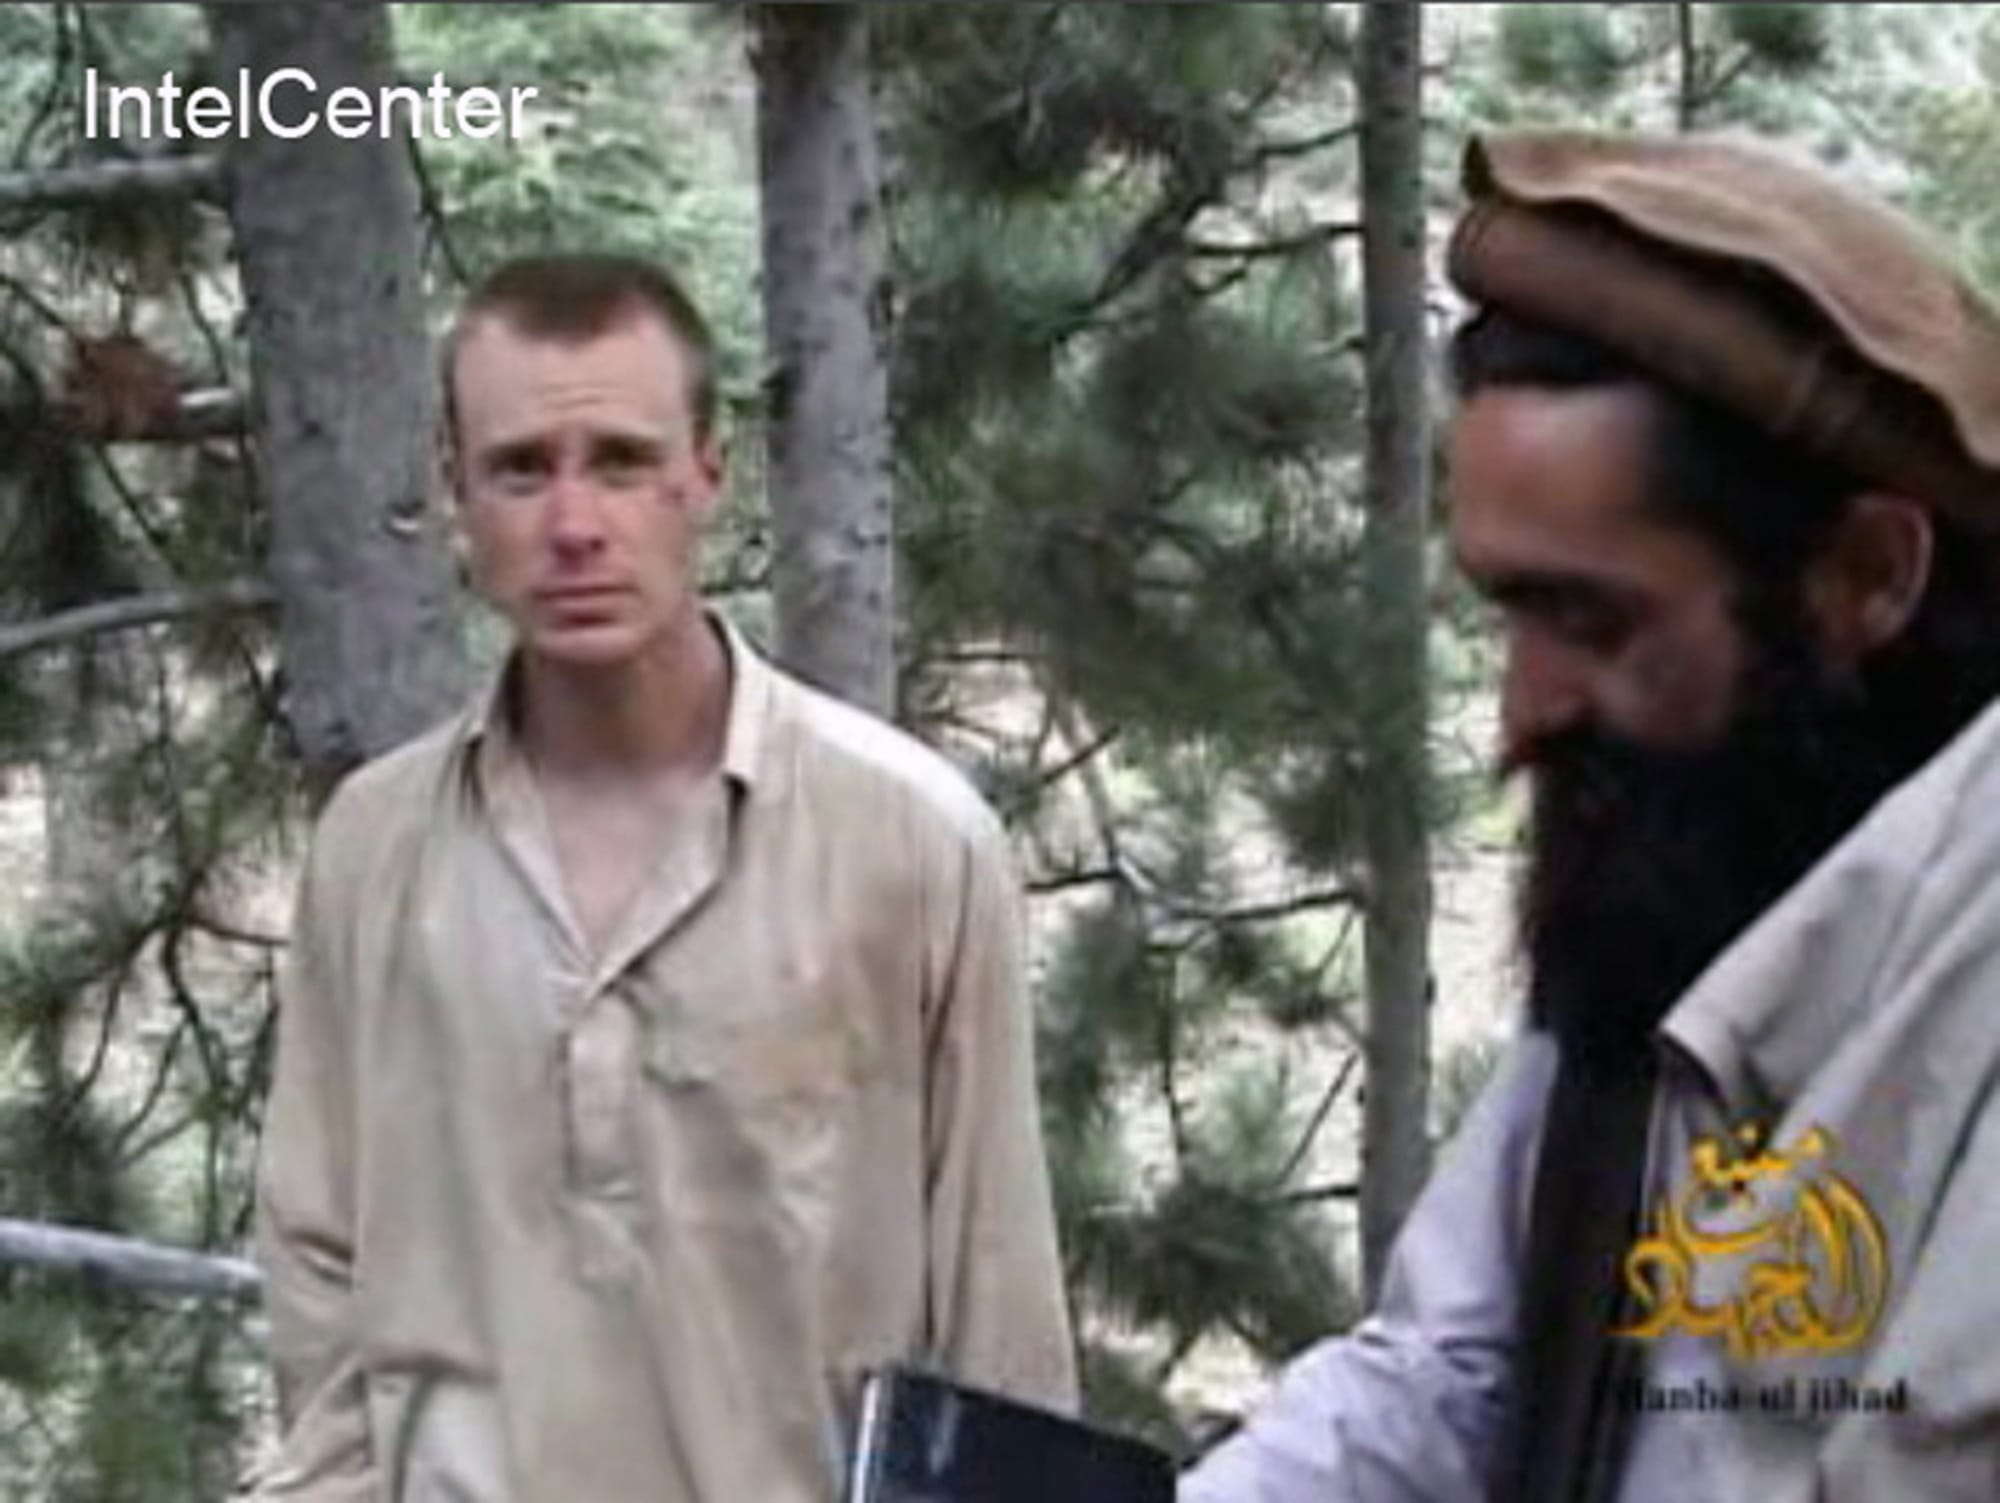 IntelCenter
Bowe Bergdahl, a U.S. Army soldier, disappeared from his outpost in Afghanistan in June 2009 and was released from Taliban captivity on May 31 in exchange for five enemy combatants held by the U.S. in Guantanamo Bay, Cuba.